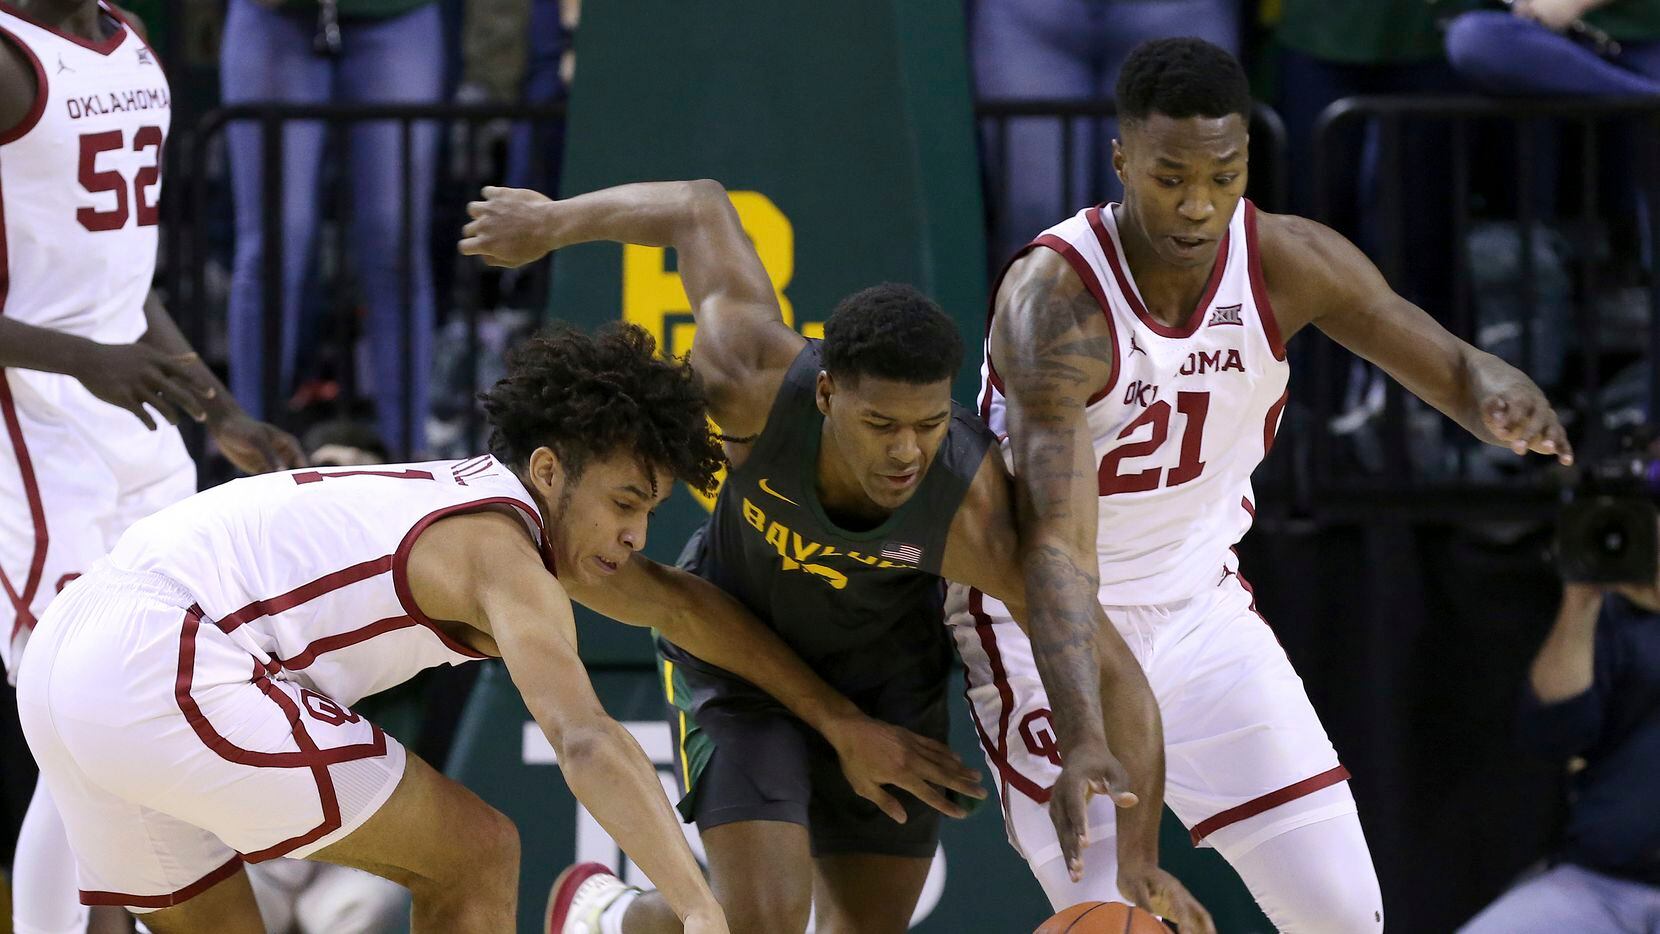 Oklahoma forward Jalen Hill (1) Baylor guard Jared Butler (12) and Oklahoma forward Kristian Doolittle (21) reach for the loose ball in the first half of an NCAA college basketball game Monday, Jan. 20, 2020, in Waco, Texas.